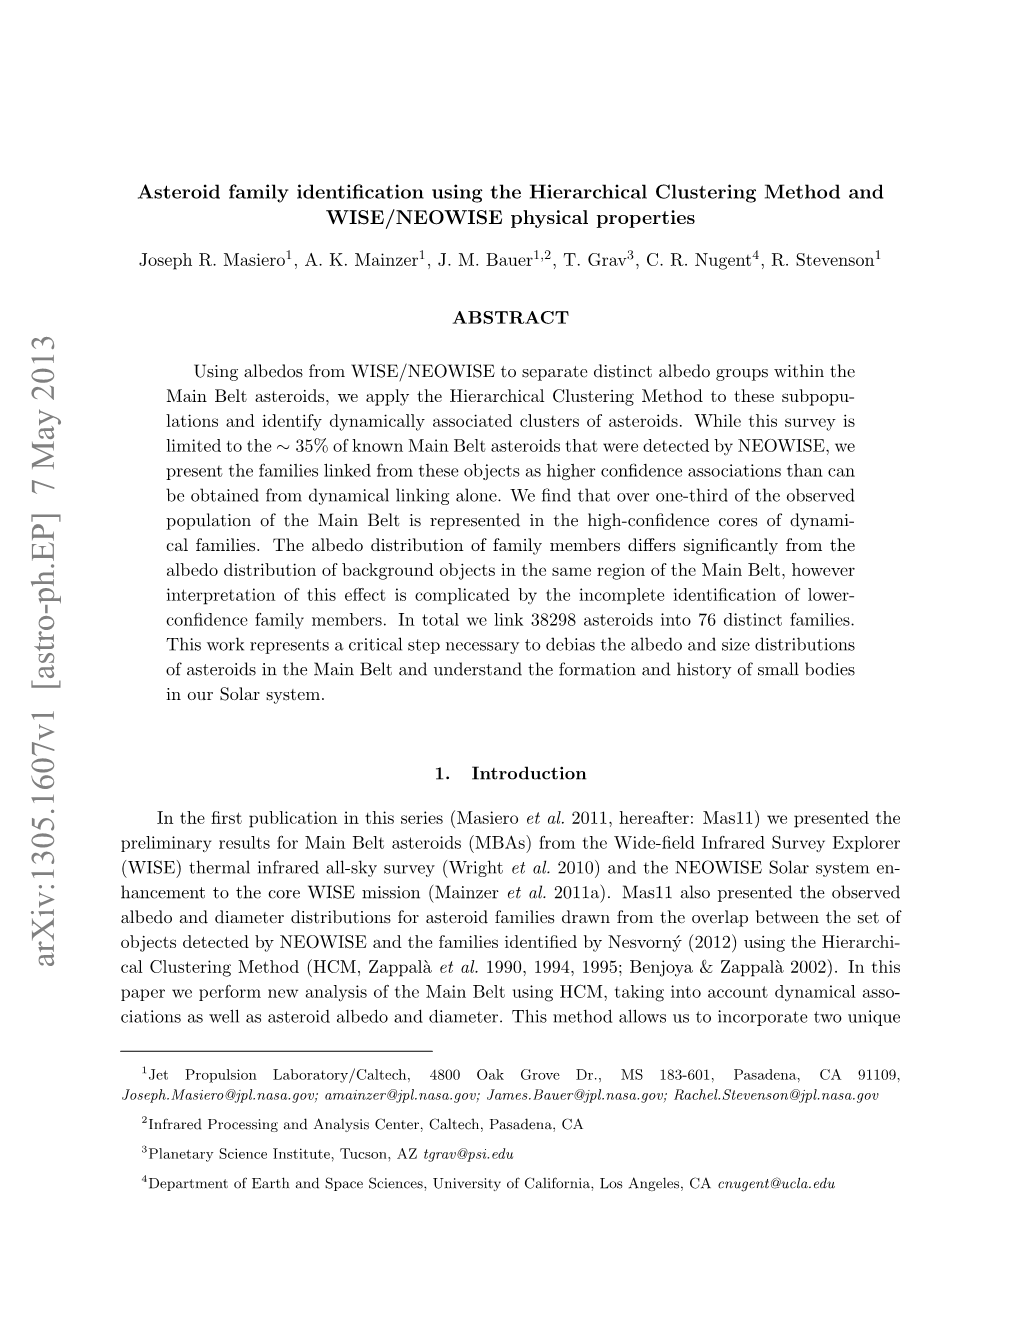 Asteroid Family Identification Using the Hierarchical Clustering Method And